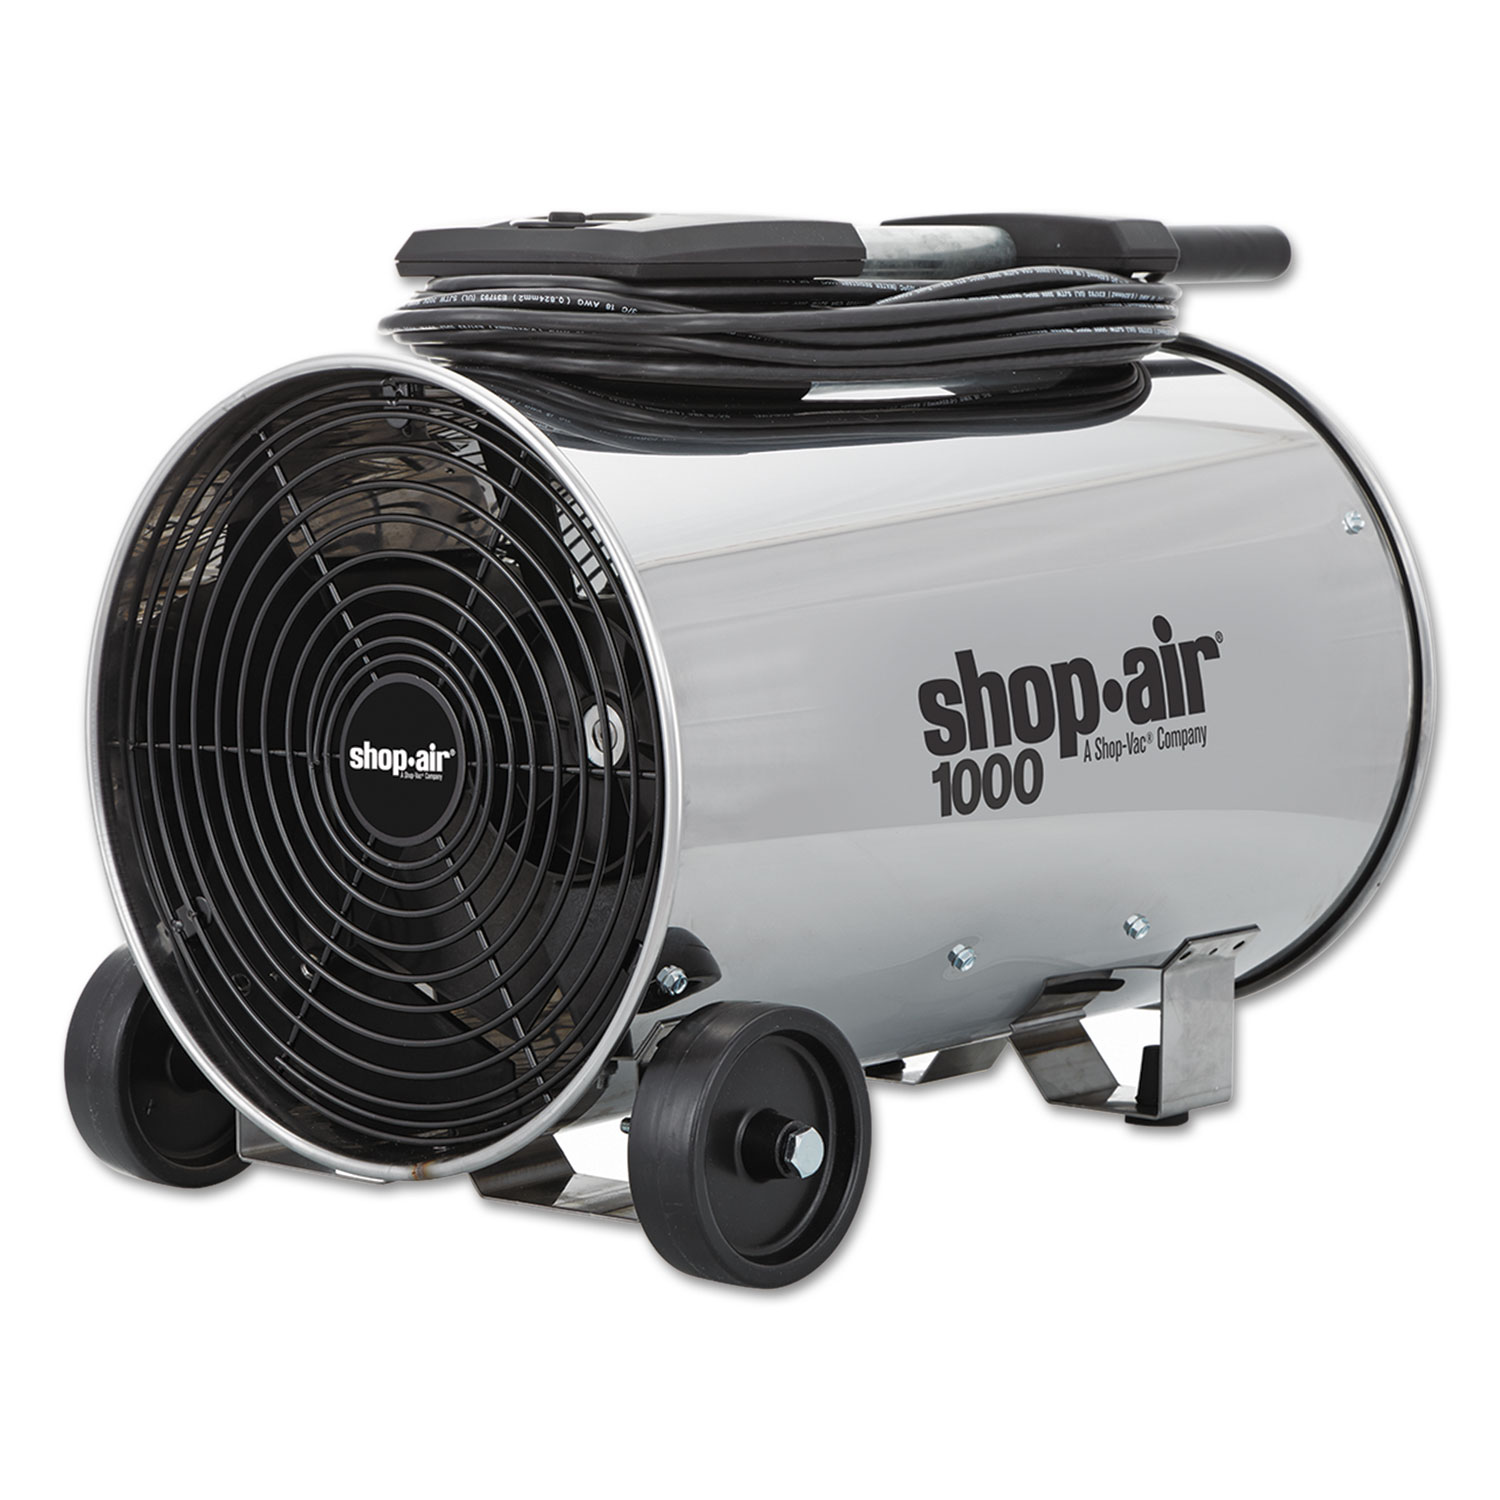  Shop-Air 1033000 Stainless Steel Portable Blower, 11, 3-Speed, 1/4 HP Motor (SHO103300) 